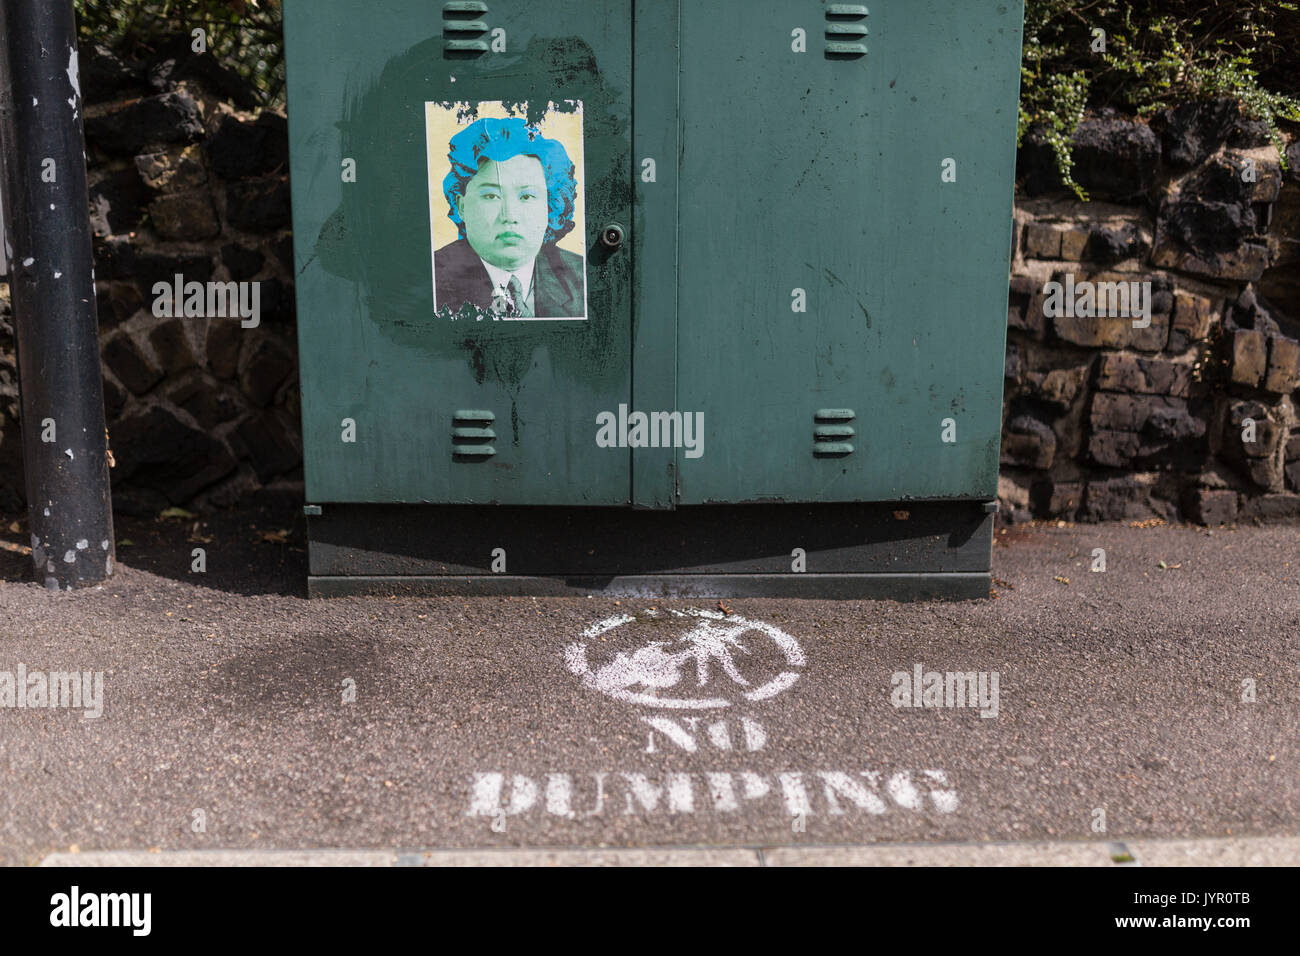 North Korean leader Kim Jong Un as Andy Warhol's Marilyn Monroe on poster, with No Dumping sign on pavement in front. Stock Photo